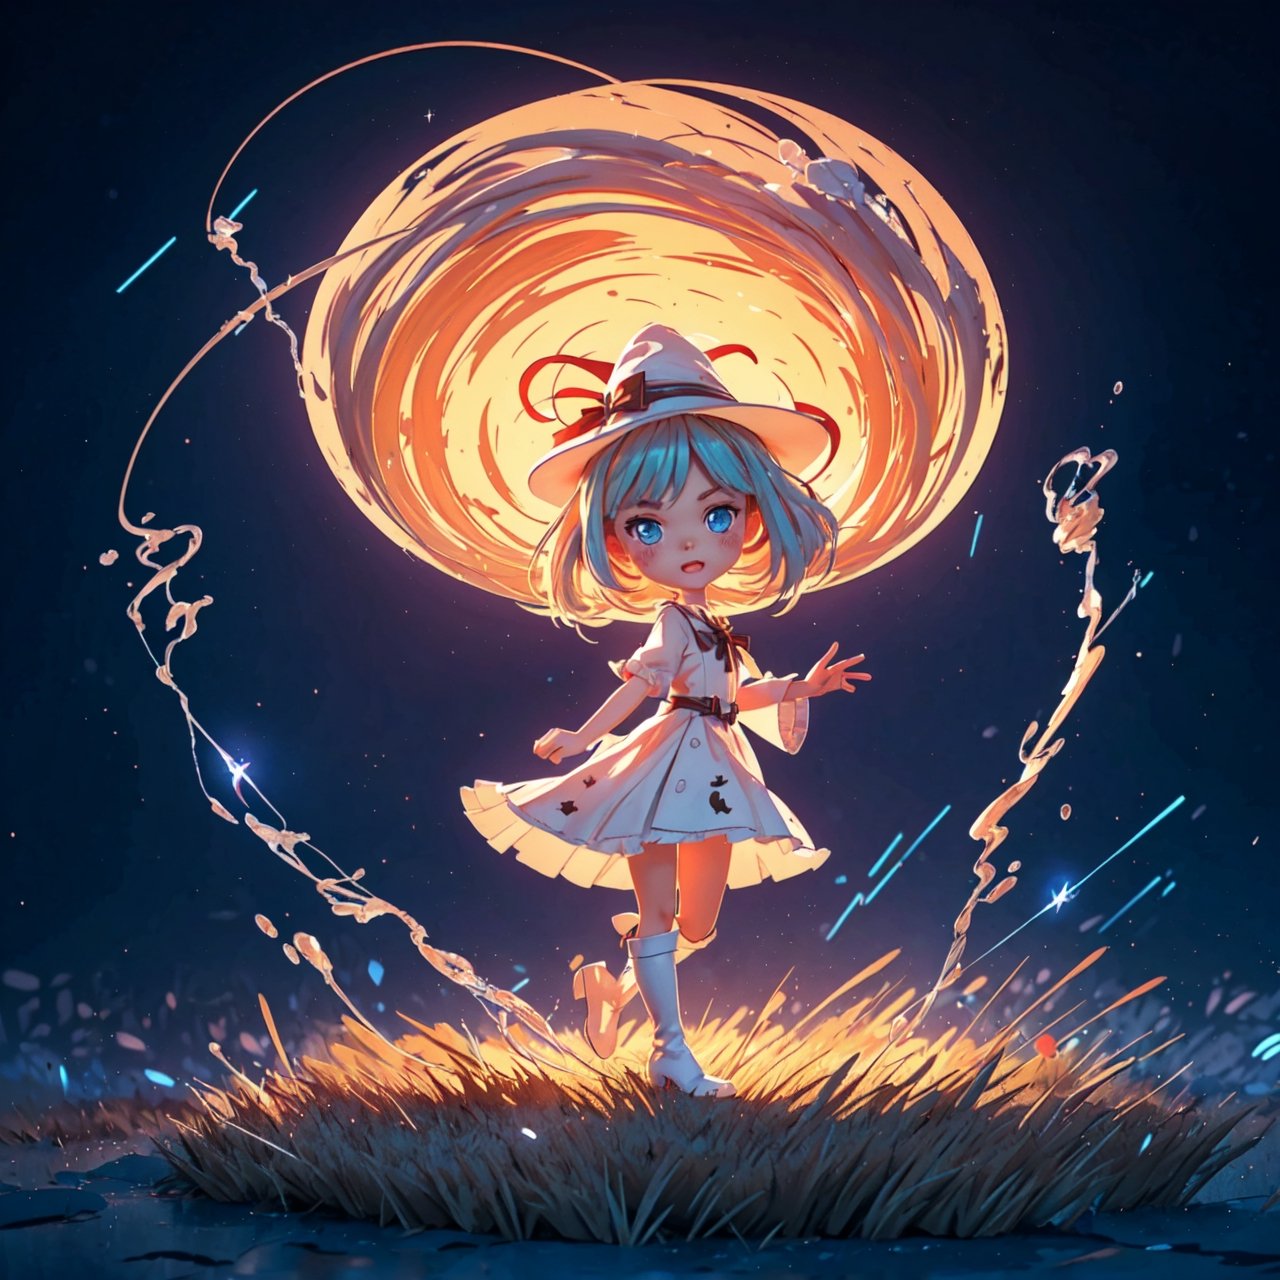 (dark background:1.33), start lights, ruins, full body, chibi, (18year old girl:1.5)), Anime SFW image, beautiful girl, slender figure, young adult, random poses, random angles, A composition that captures the whole body, detailed fan art, witch girl, splash art anime kawaii, bright witch, official artwork, witch hat commission, Cheerful, official fan art, cute art style, best quality, extreme light and shadow, magical wand, white thigh high boots, brown robe, white skirt, night view, bouncing hair, 1 girl, anime style, small face features, large expressive eyes, small nose, thin lips, small chin, soft hands, (realism: 1.2), petite, bangs, (trace the contour with detailed intricate white thin lined crackling shimmering vibrant lightning:1.3), (glowing:1.1), (shimmer and twinkl:1.2), luminism, breathtaking fusion of light, indelible impression, high quality, masterpiece, swirling luminescent ribbons, (halloween theme:1.15), 